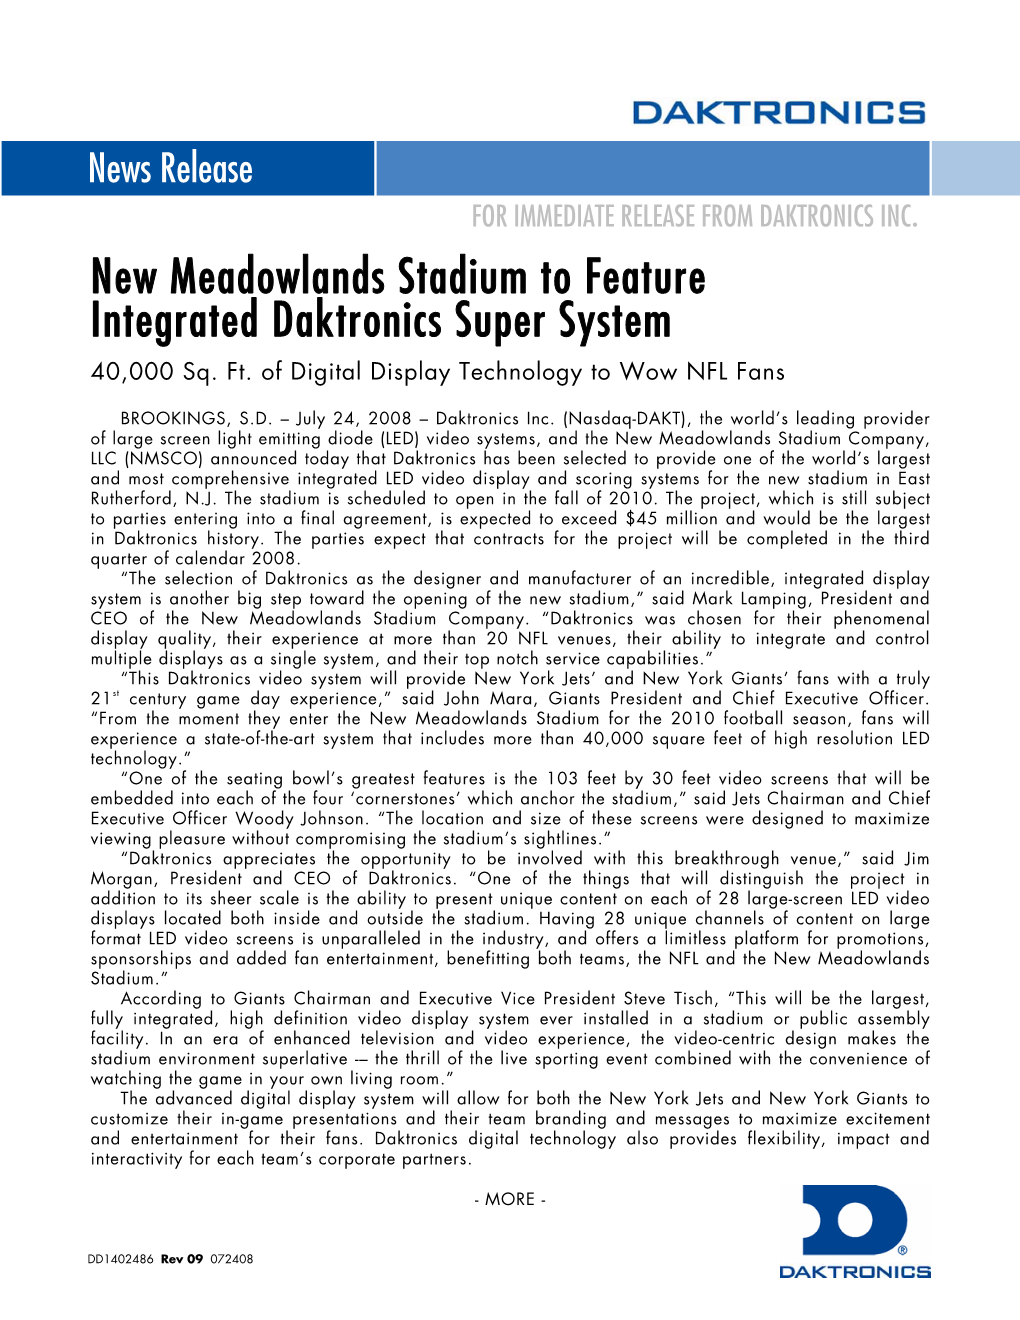 New Meadowlands Stadium to Feature Integrated Daktronics Super System 40,000 Sq